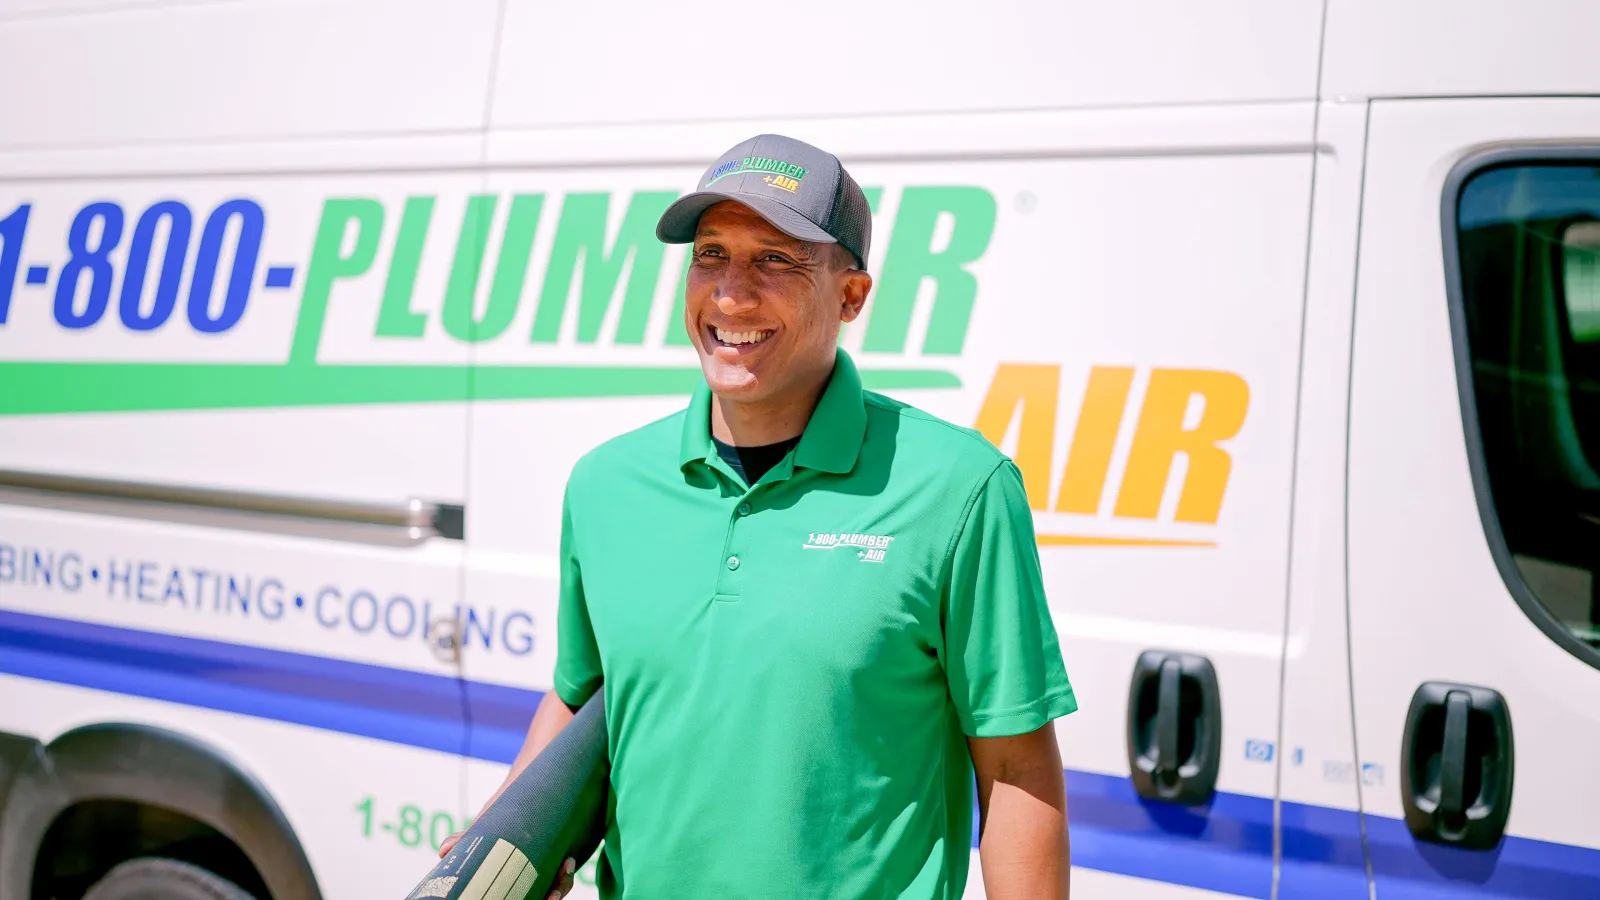 A 1-800-Plumber +Air of Clearwater plumber